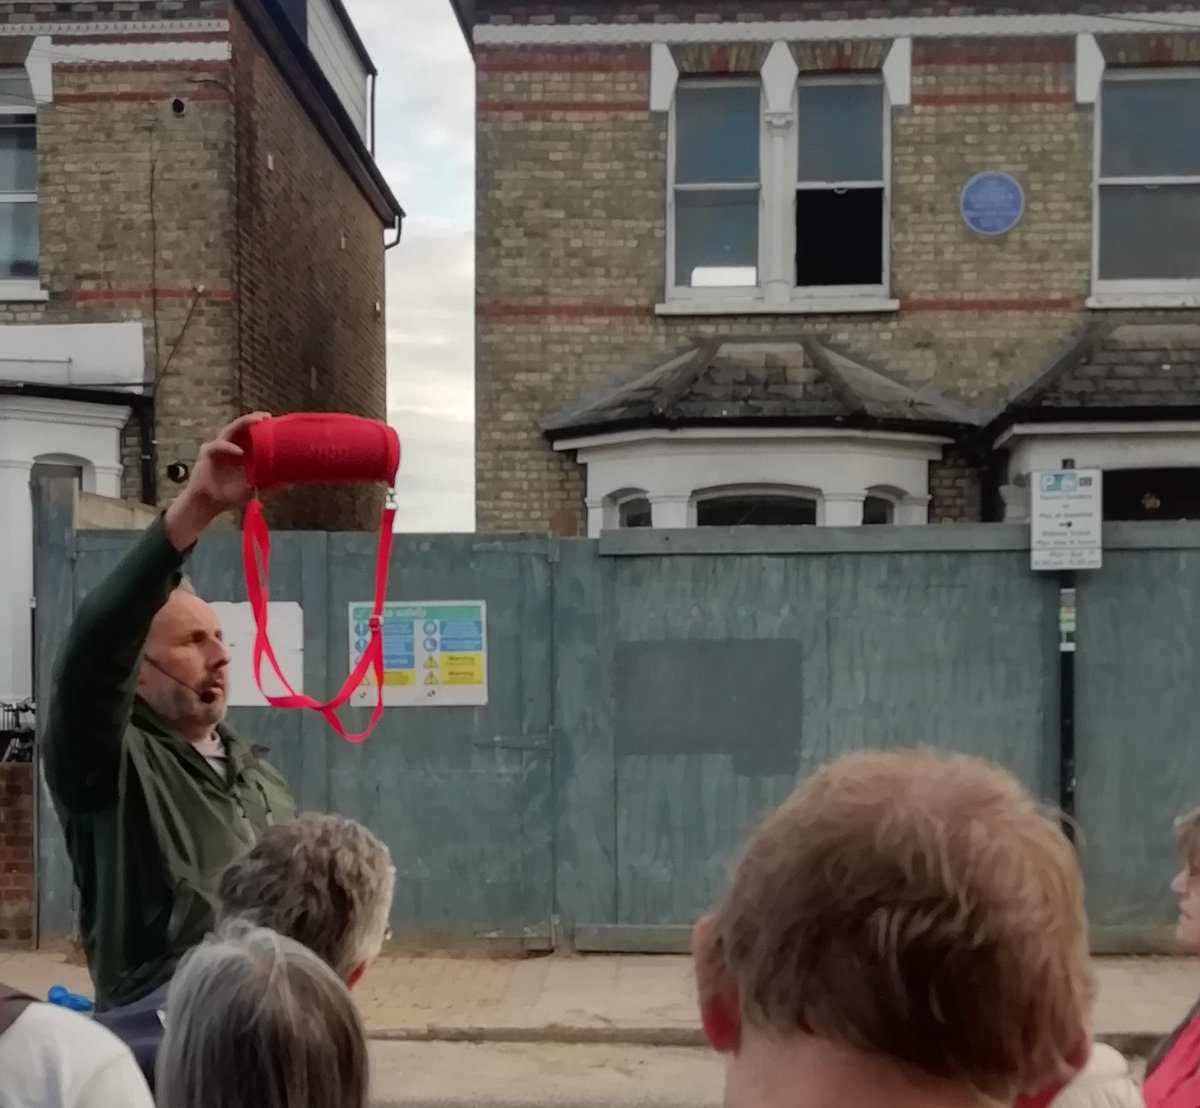 Tonight local historian, Geoff Simmons(@summerstown182), on his Musical Tour of Tooting (#allyouneedispeaceloveandflowertothepeople), plays us 'The End of the Road' by Scottish entertainer Sir Harry Lauder (1870-1950). Outside Lauder's Tooting house on Lauder's birthday (4 Aug).